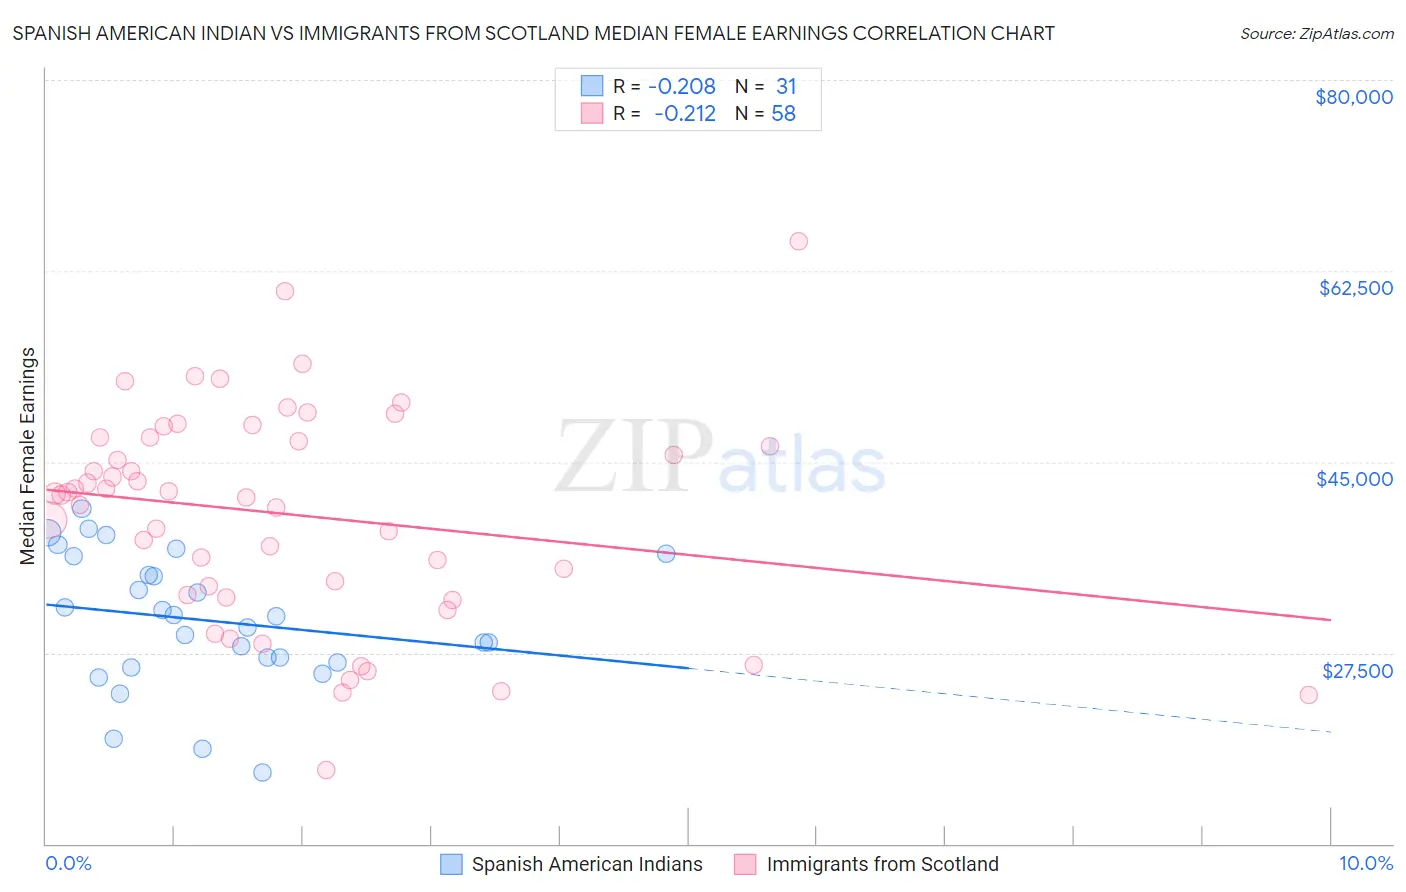 Spanish American Indian vs Immigrants from Scotland Median Female Earnings